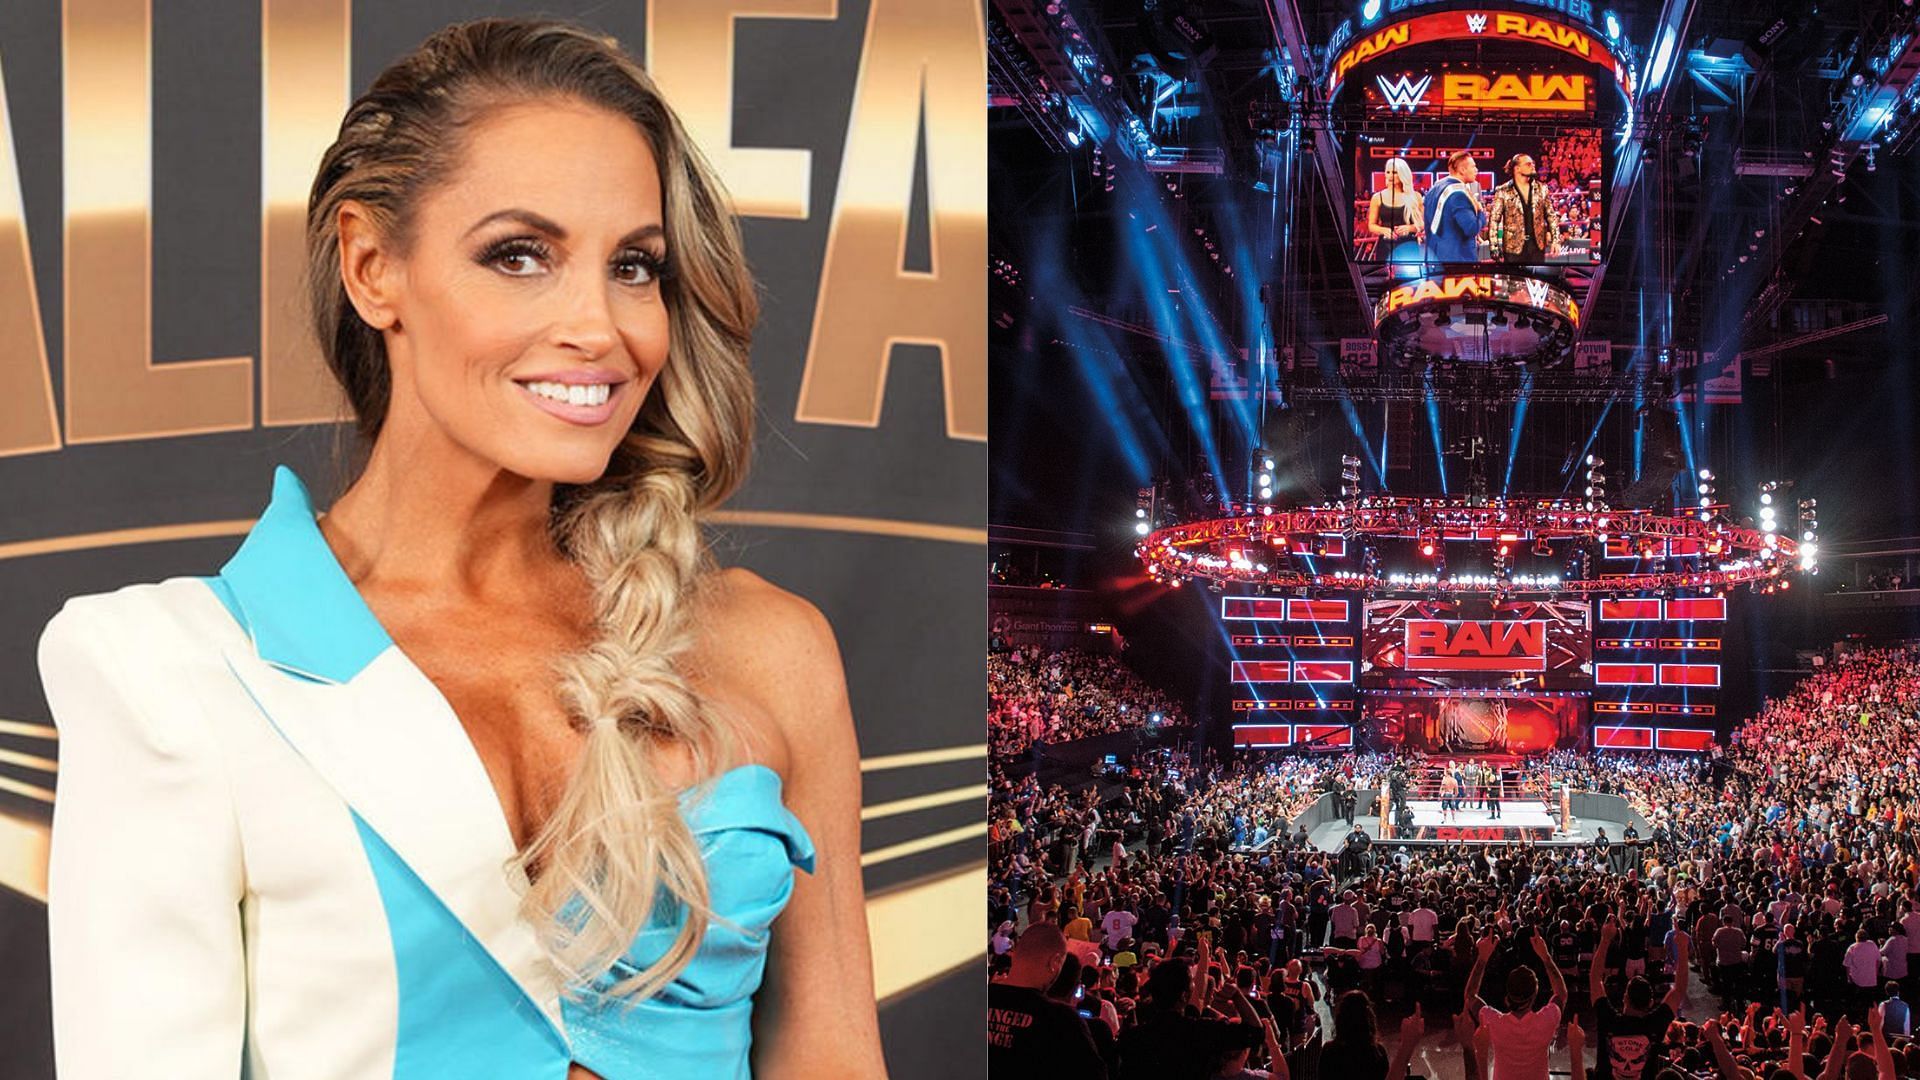 Trish Stratus is scheduled to appear on tomorrow